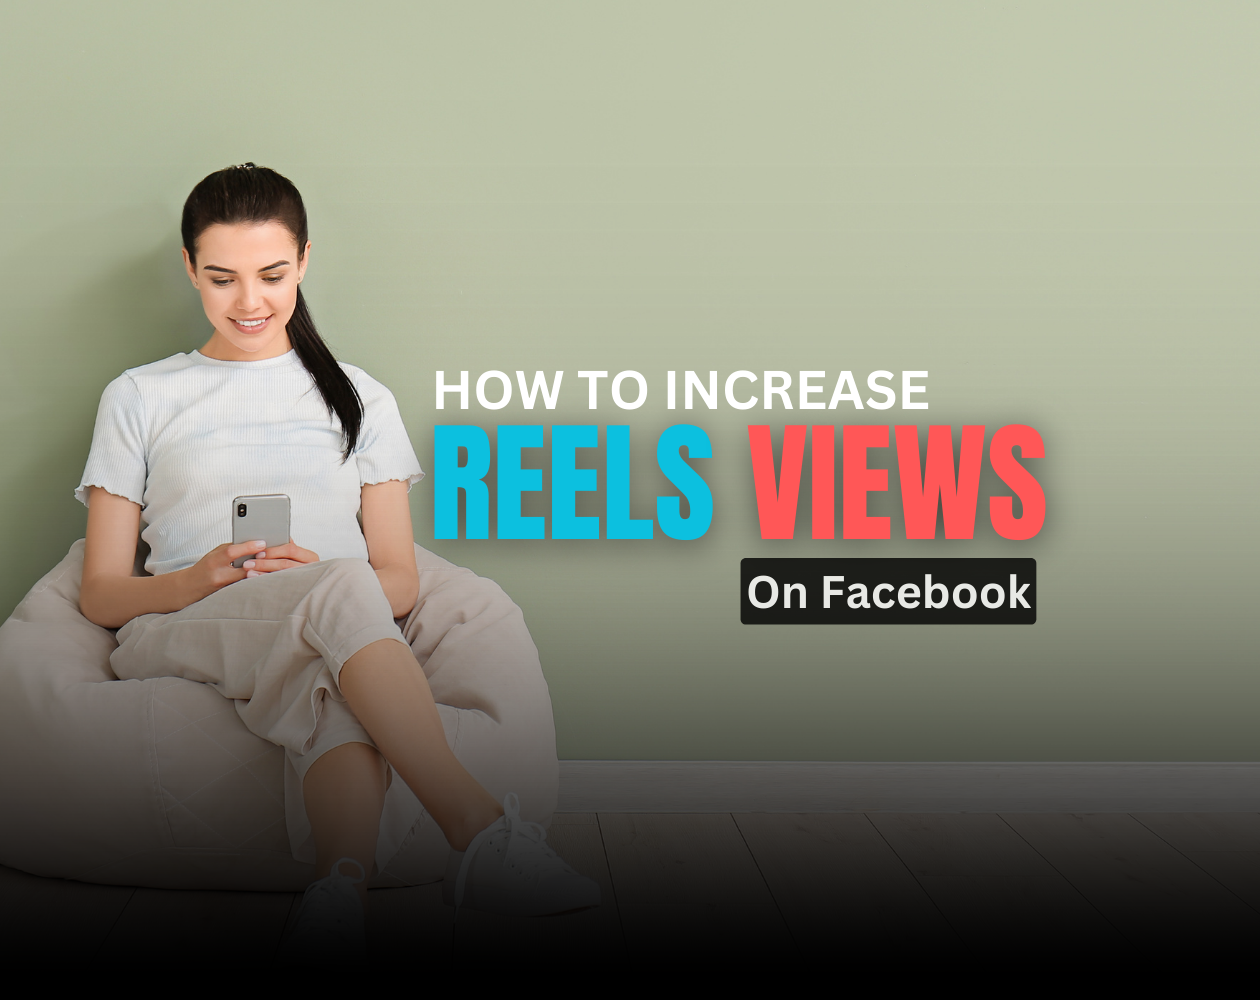 How do you get high views on Facebook Reels?   So, how do you get high views on Facebook Reels? Facebook Reels have become an extremely popular way for creators and businesses to engage their audiences and grow their reach. However, with more competition 